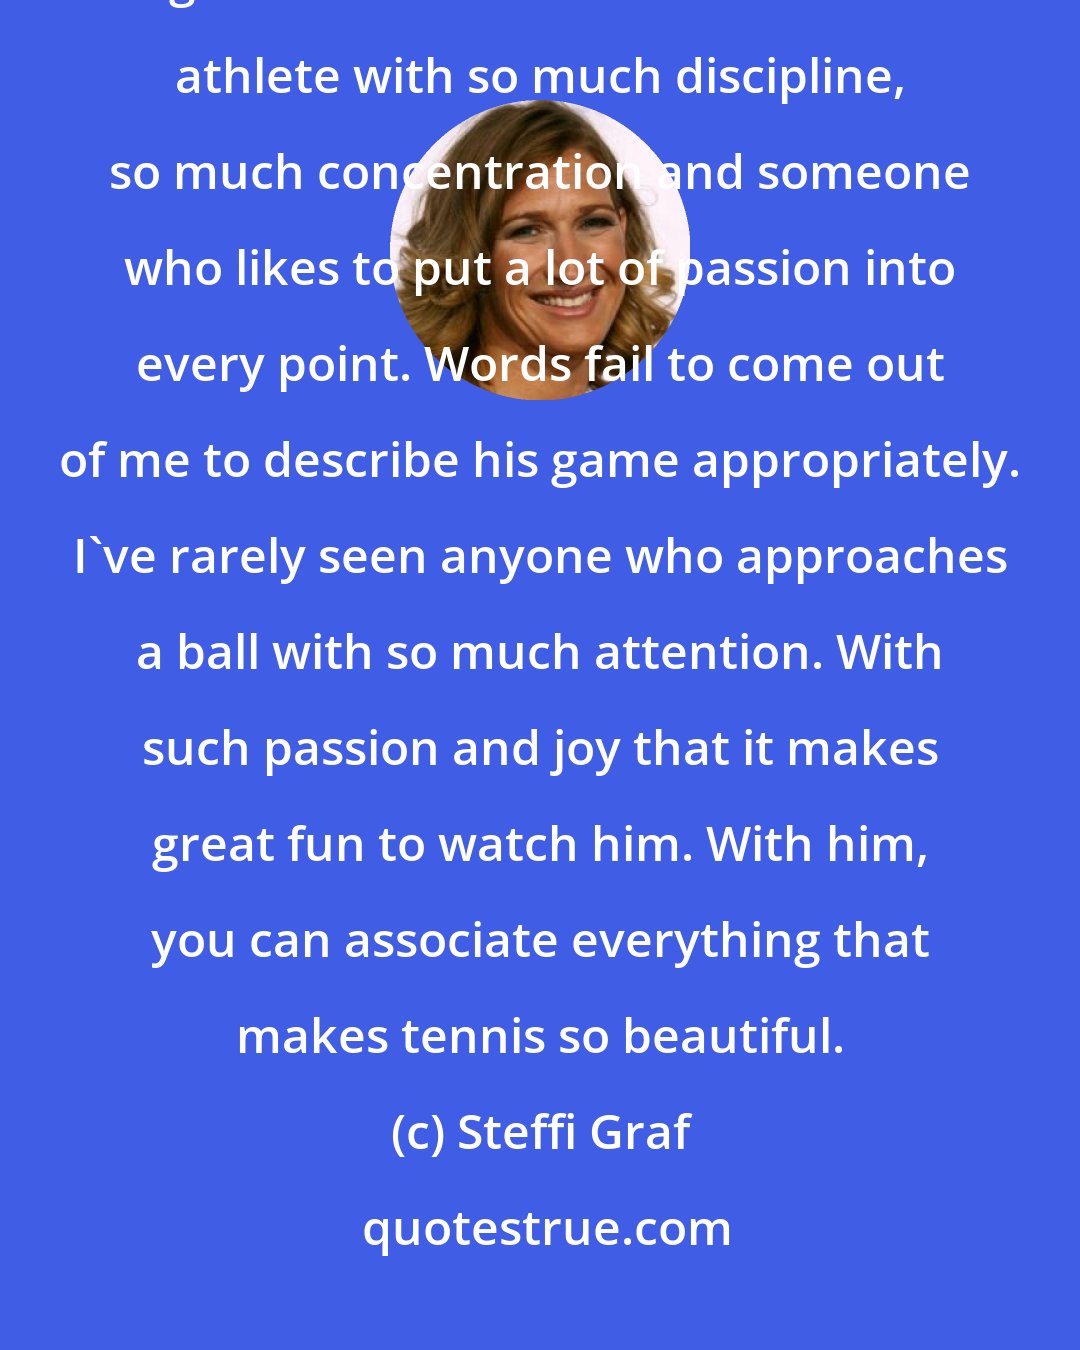 Steffi Graf: If you watch Rafael Nadal play tennis, you can only respond with amazement and great admiration. He is an incredible athlete with so much discipline, so much concentration and someone who likes to put a lot of passion into every point. Words fail to come out of me to describe his game appropriately. I've rarely seen anyone who approaches a ball with so much attention. With such passion and joy that it makes great fun to watch him. With him, you can associate everything that makes tennis so beautiful.